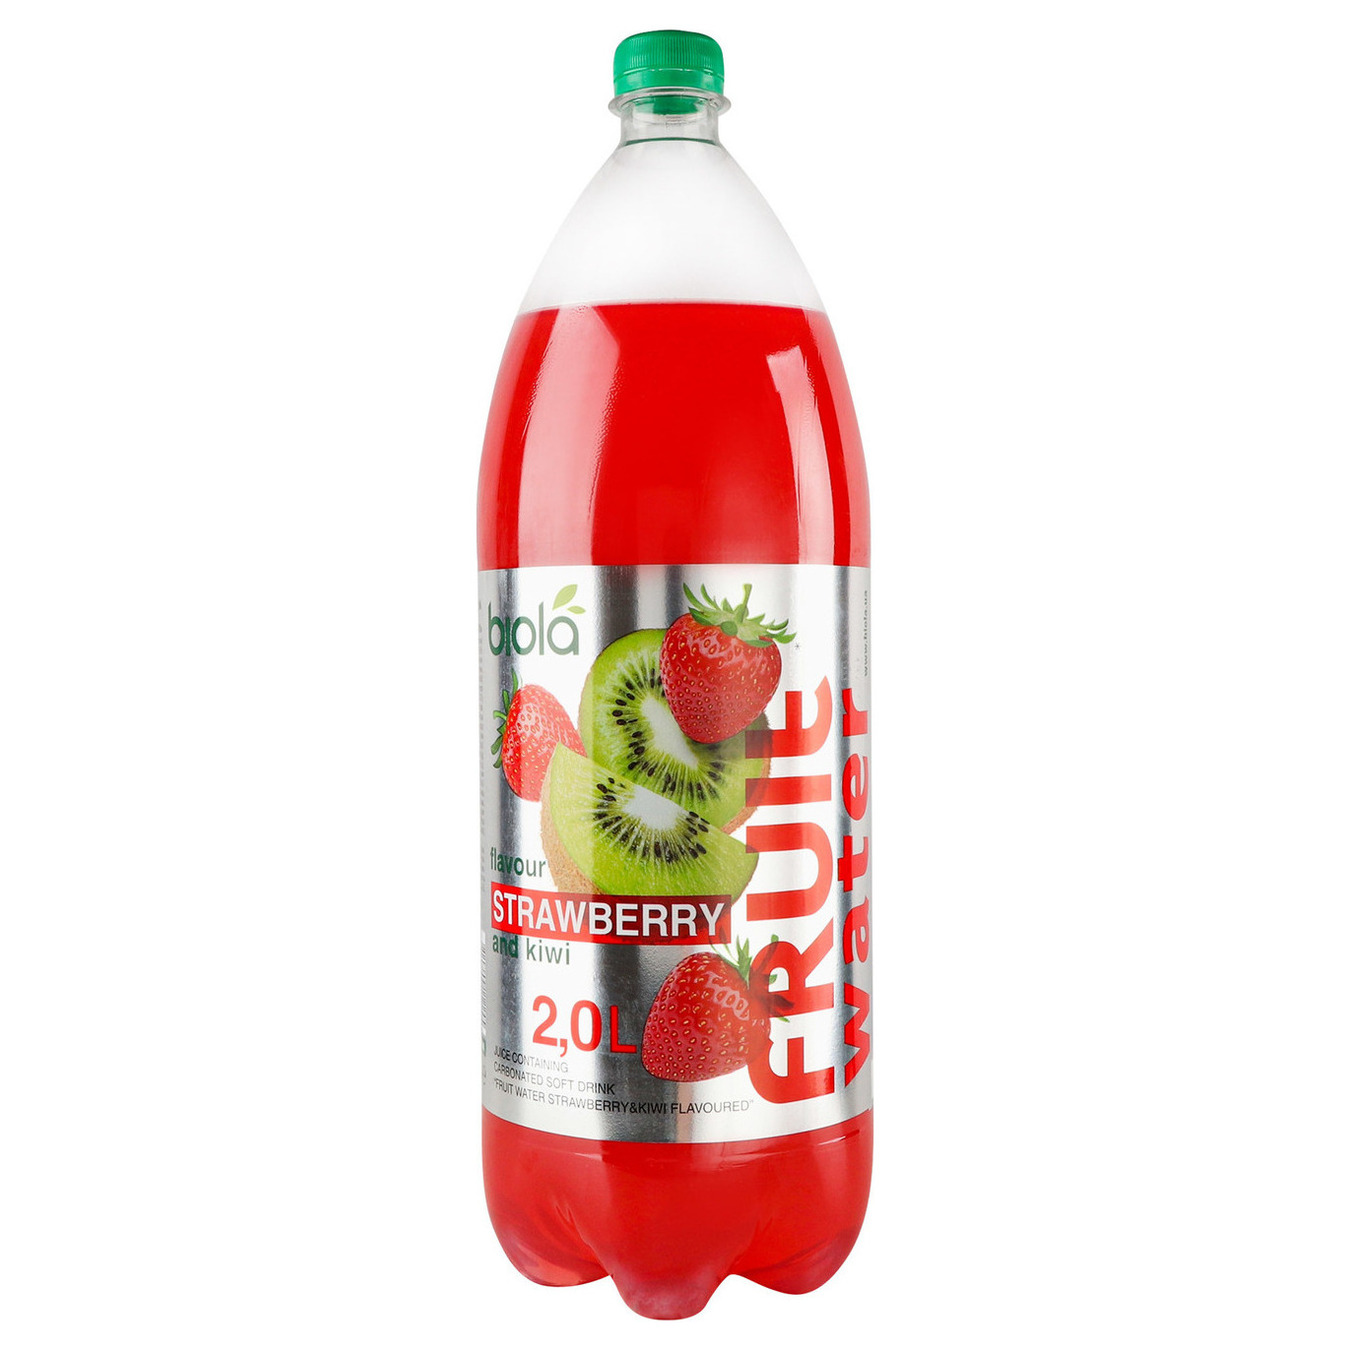 Biola Fruit Water Non-alcoholic drink Strawberry and kiwi strongly carbonated juice 2l